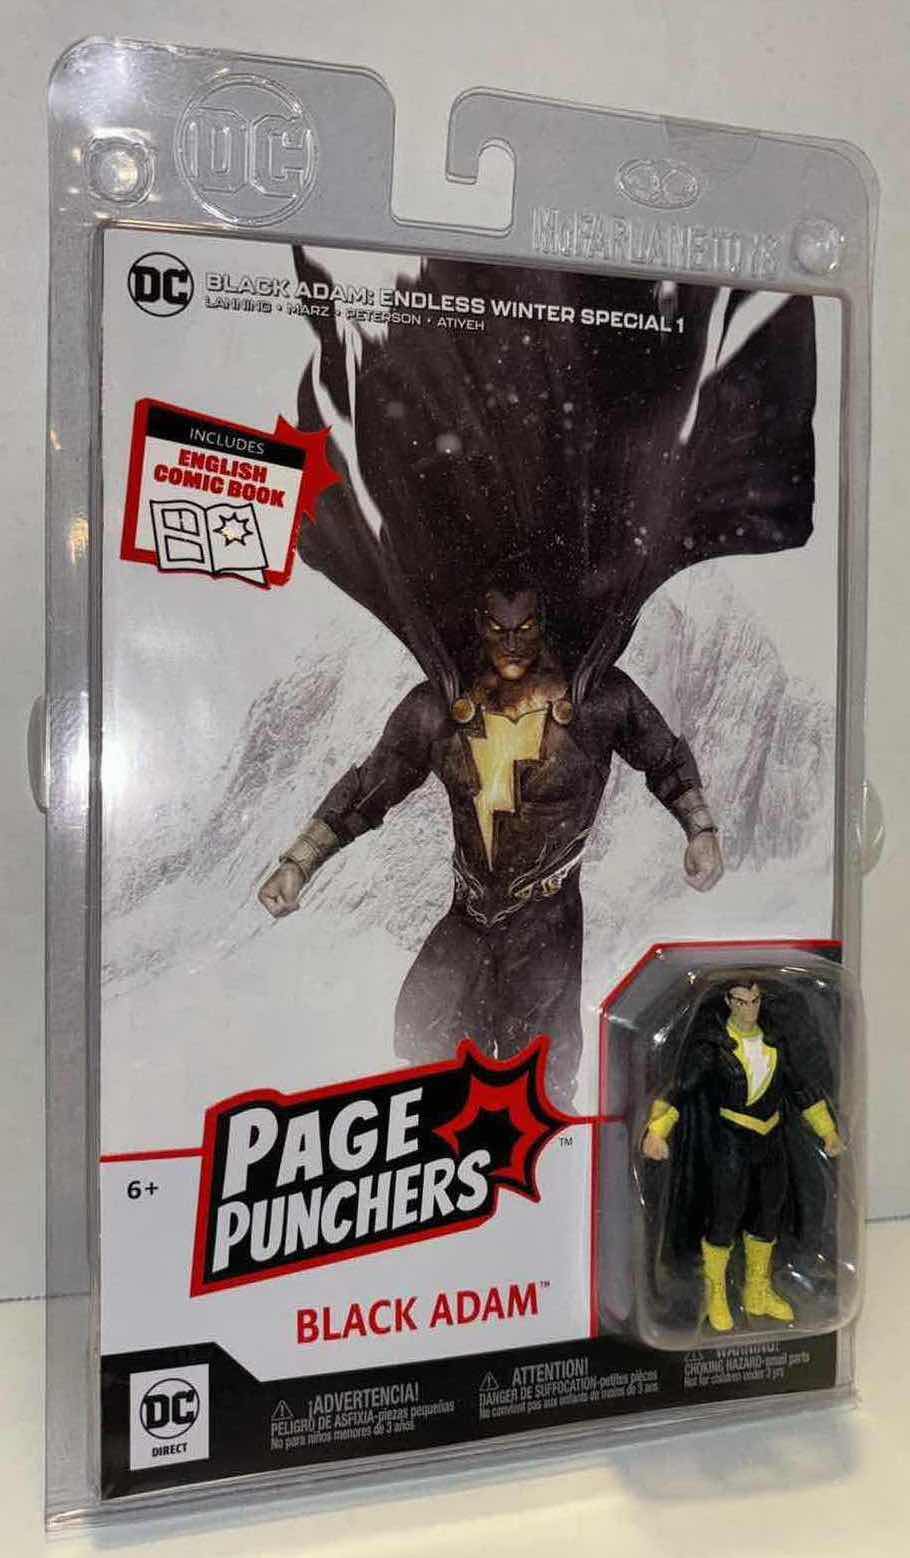 Photo 1 of NEW MCFARLANE TOYS DC DIRECT PAGE PUNCHERS 3” ACTION FIGURE & ENGLISH COMIC BOOK, “BLACK ADAM” & “BLACK ADAM: ENDLESS WINTER SPECIAL 1” COMIC BOOK (1)